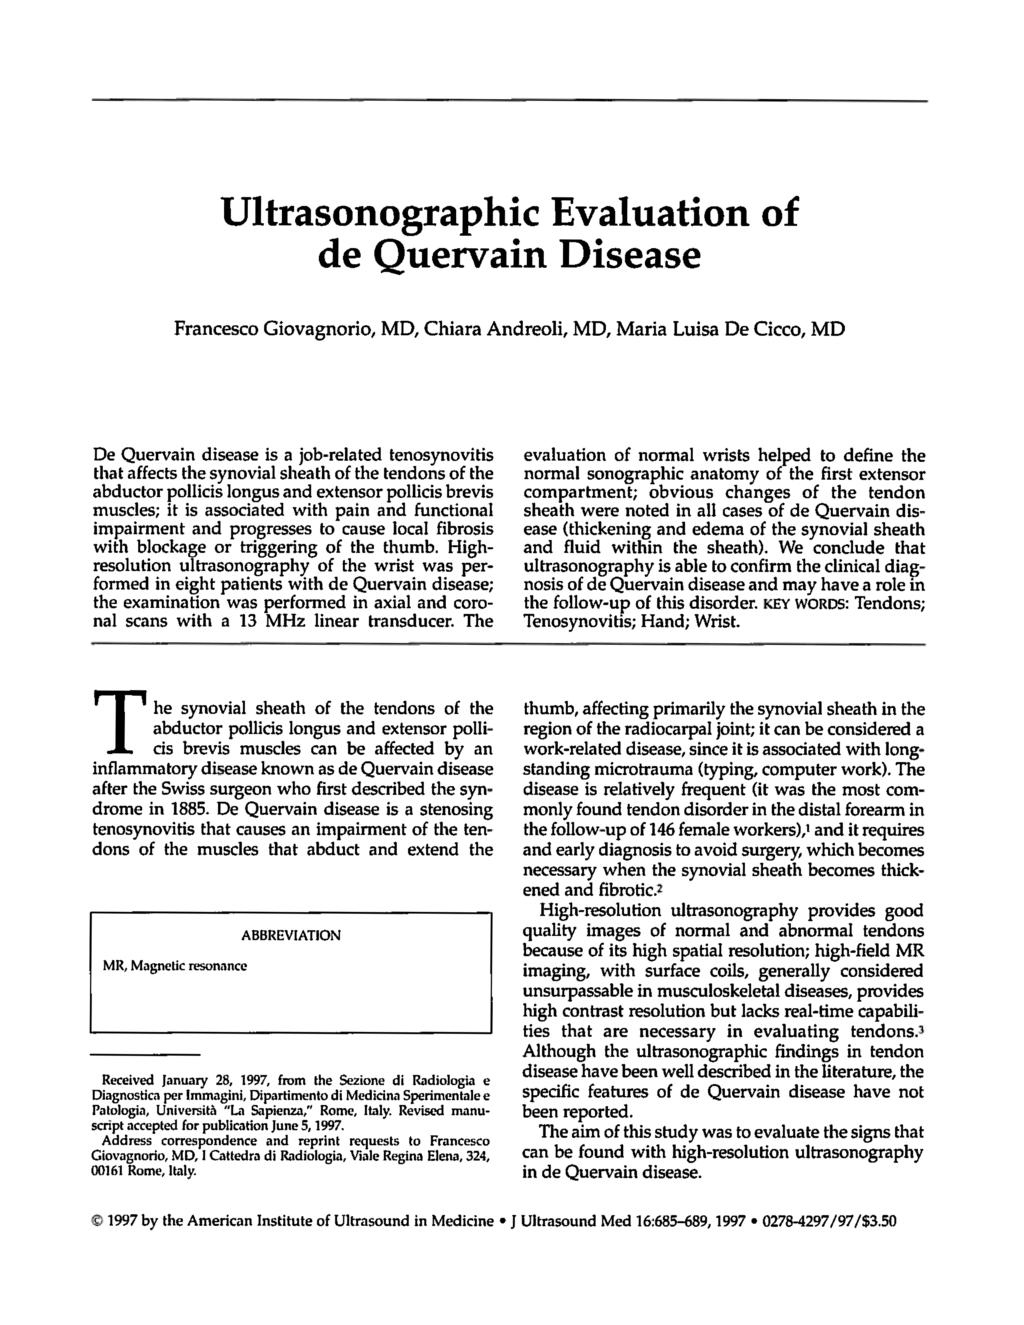 Ultrasonographic Evaluation of de Quervain Disease Francesco Giovagnorio, MD, Chiara Andreoli, MD, Maria Luisa De Cicco, MD De Quervain disease is a job-related tenosynovitis that affects the